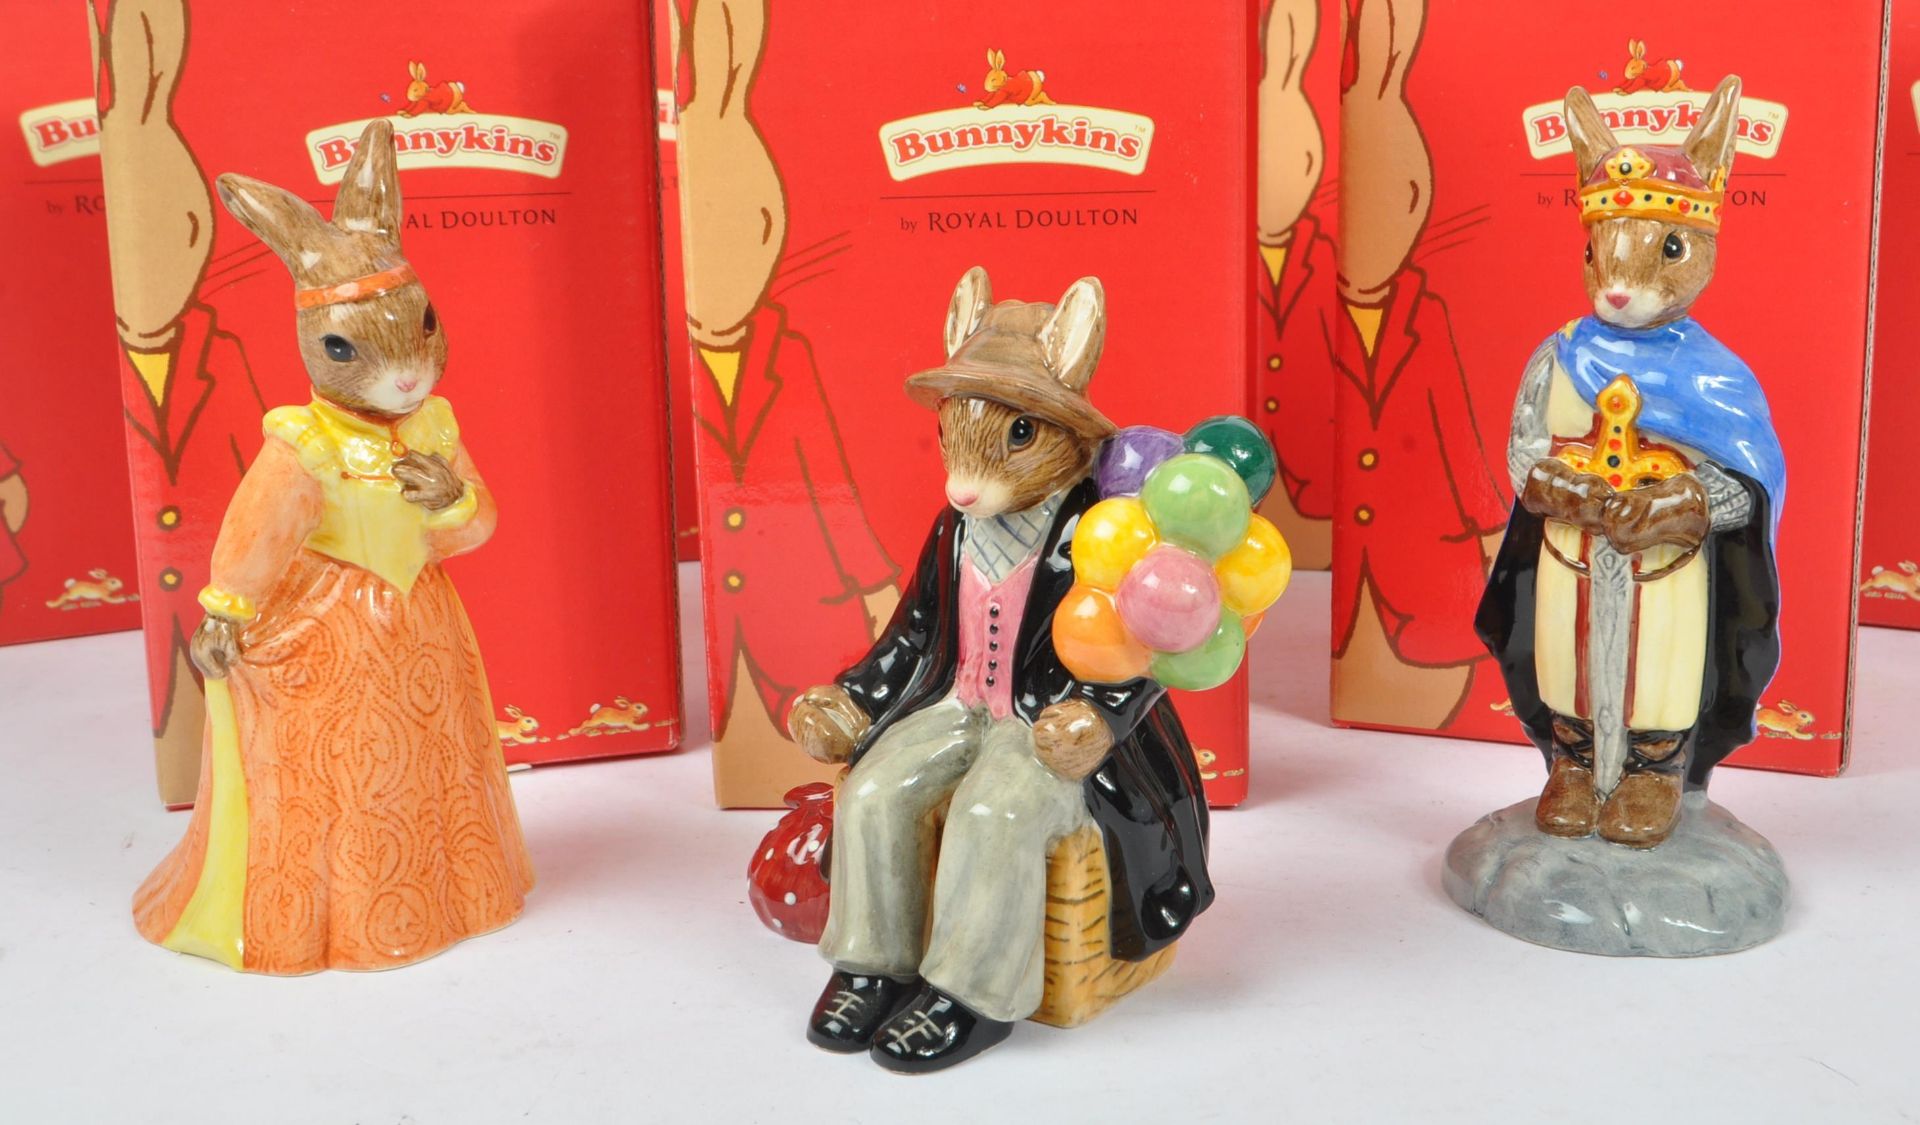 ROYAL DOULTON - BUNNYKINS - COLLECTION OF PORCELAIN FIGURES - Image 2 of 6